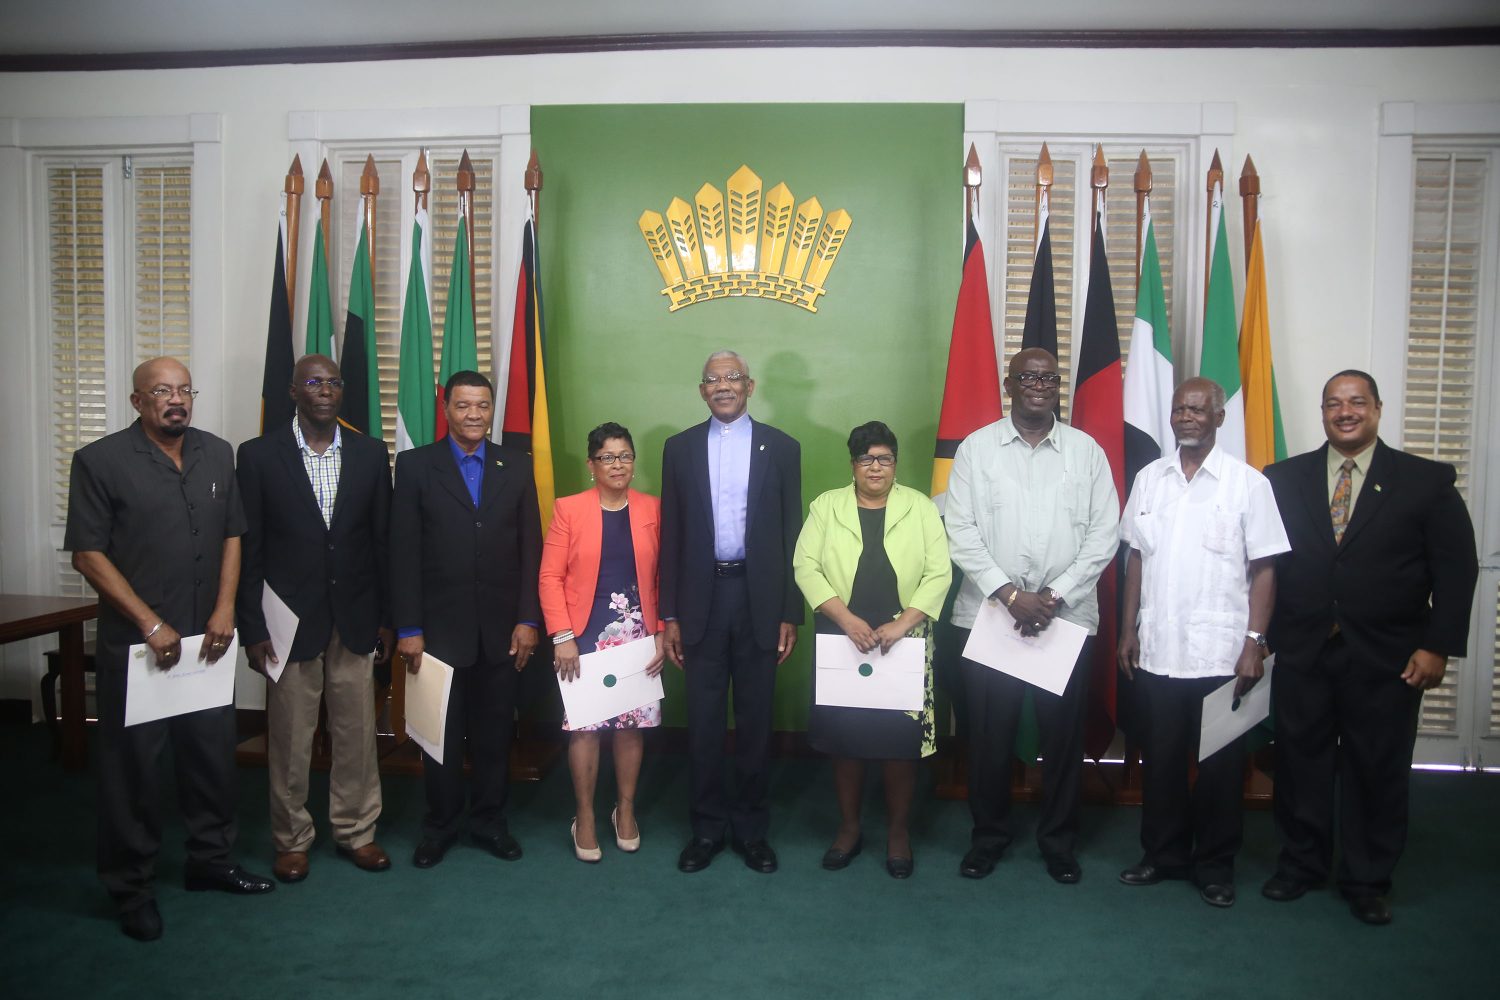 President David Granger (centre) with the members of the newly sworn in Local Government Commission. From left are Norman Whittaker, former Minister of Local Government and Regional Development; trade unionist Andrew Garnett; former Region 4 Chairman Clement Corlette; Joan-Ann Romascindo; former Town Clerk for the City of Georgetown Carol Sooba; former Region 10 Chairman Mortimer Mingo;  former Minister of Local Government and Regional Development Clinton Collymore and Marlon Williams. (Keno George photo)